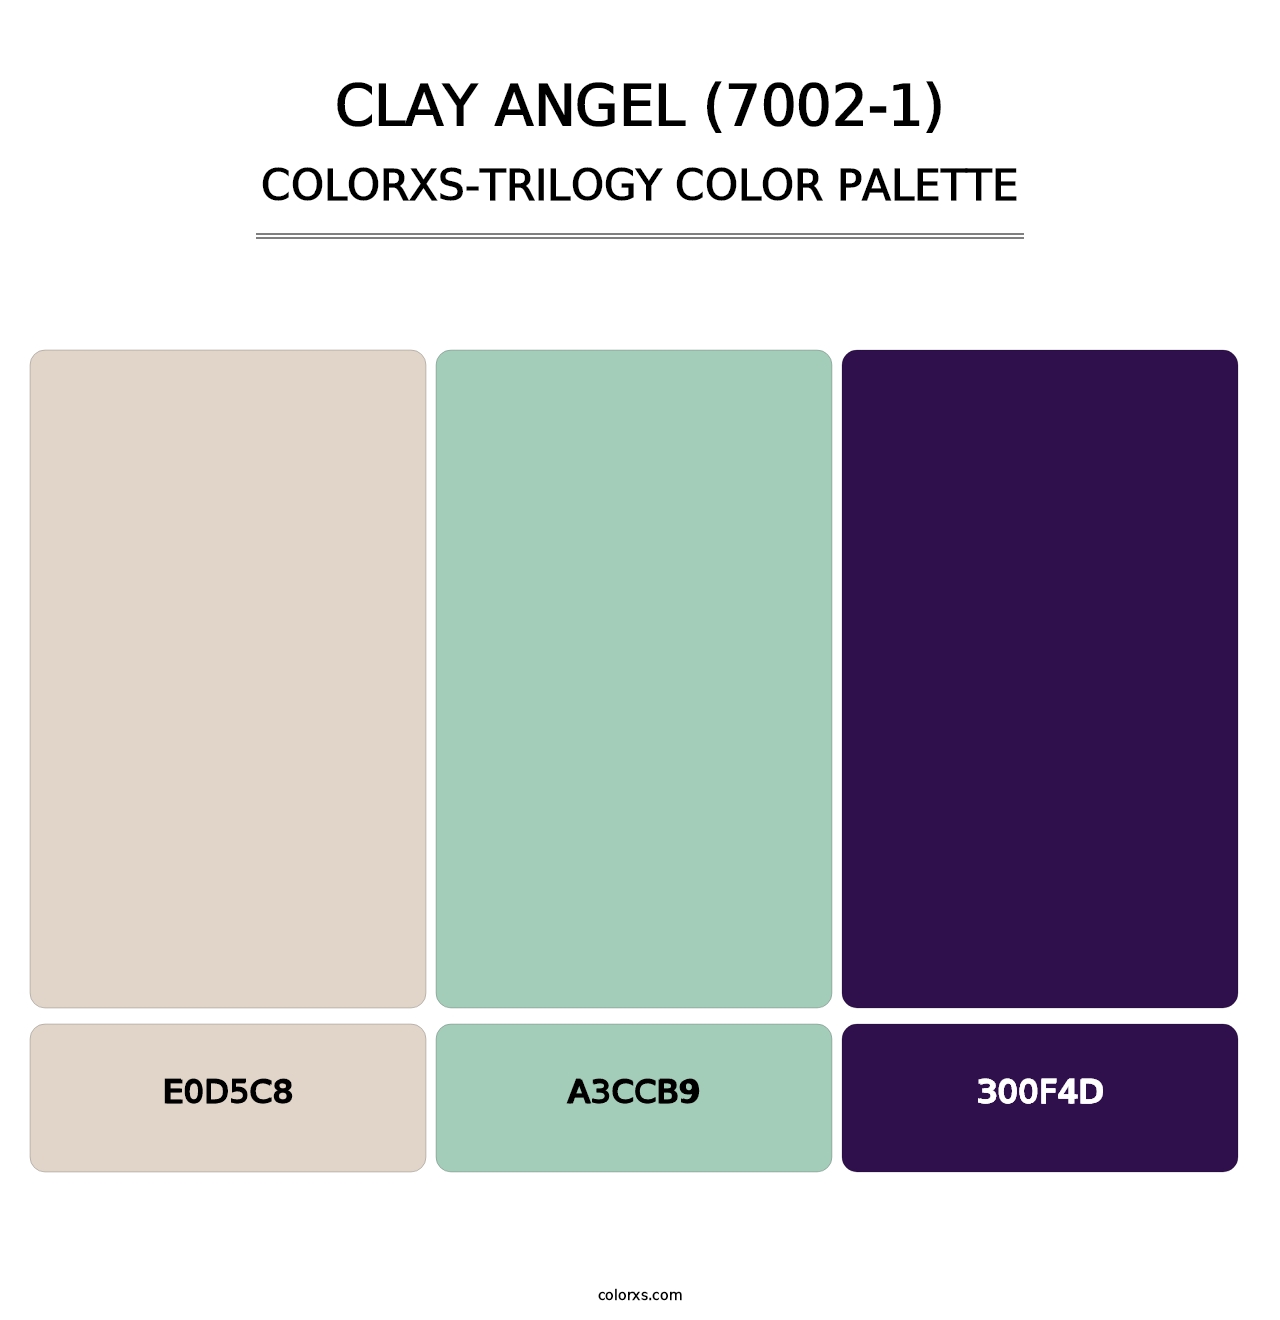 Clay Angel (7002-1) - Colorxs Trilogy Palette